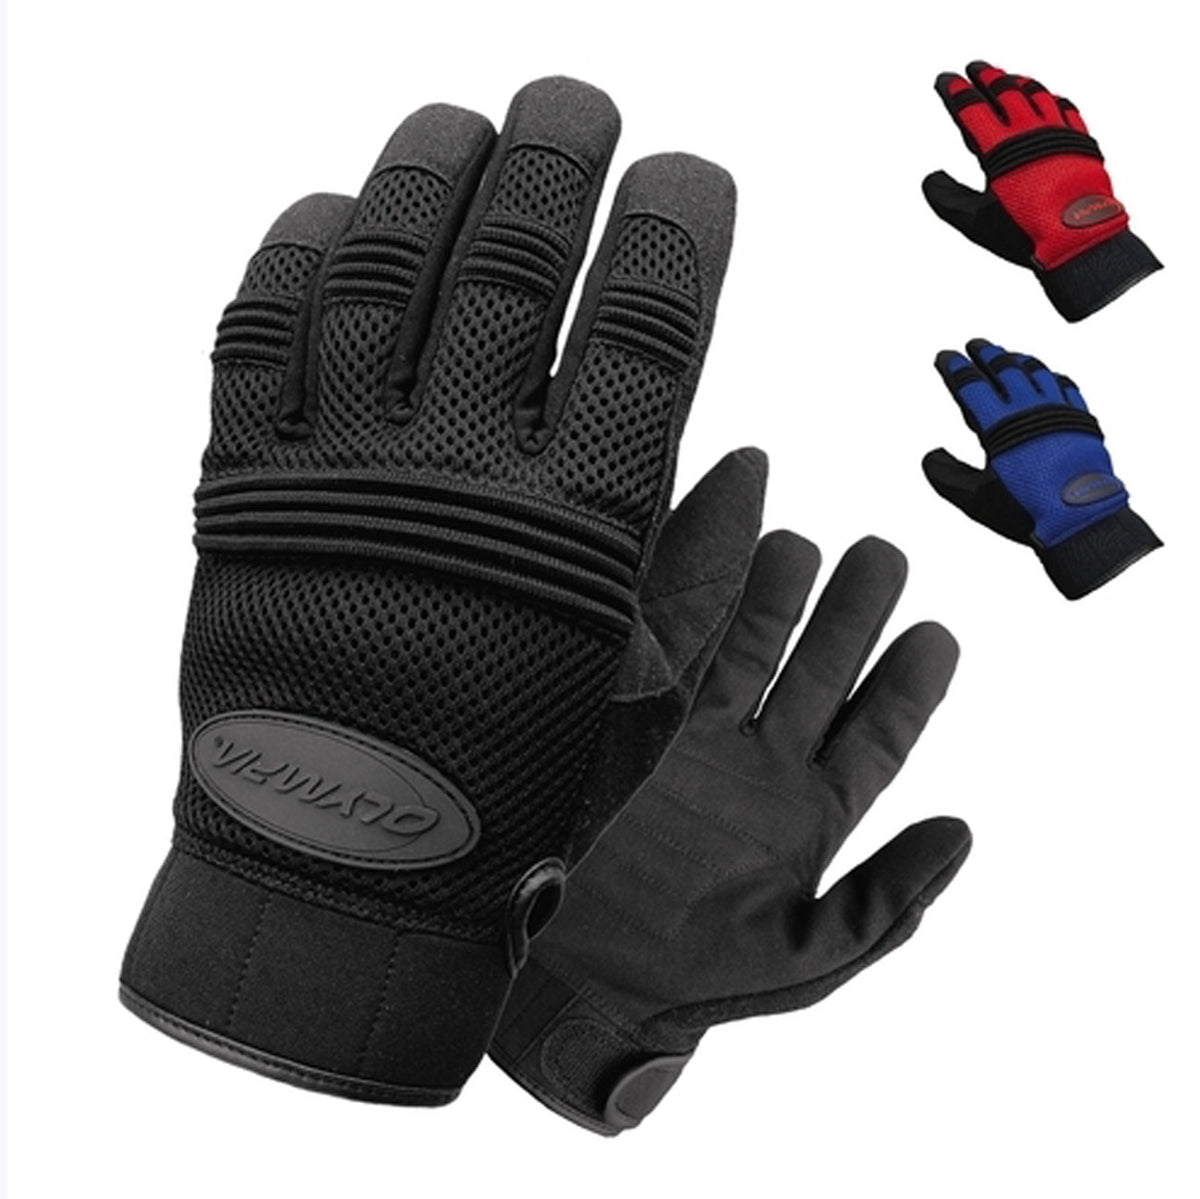 Olympia 4 in 1 All Terrain Winter Glove - Olympia Gloves